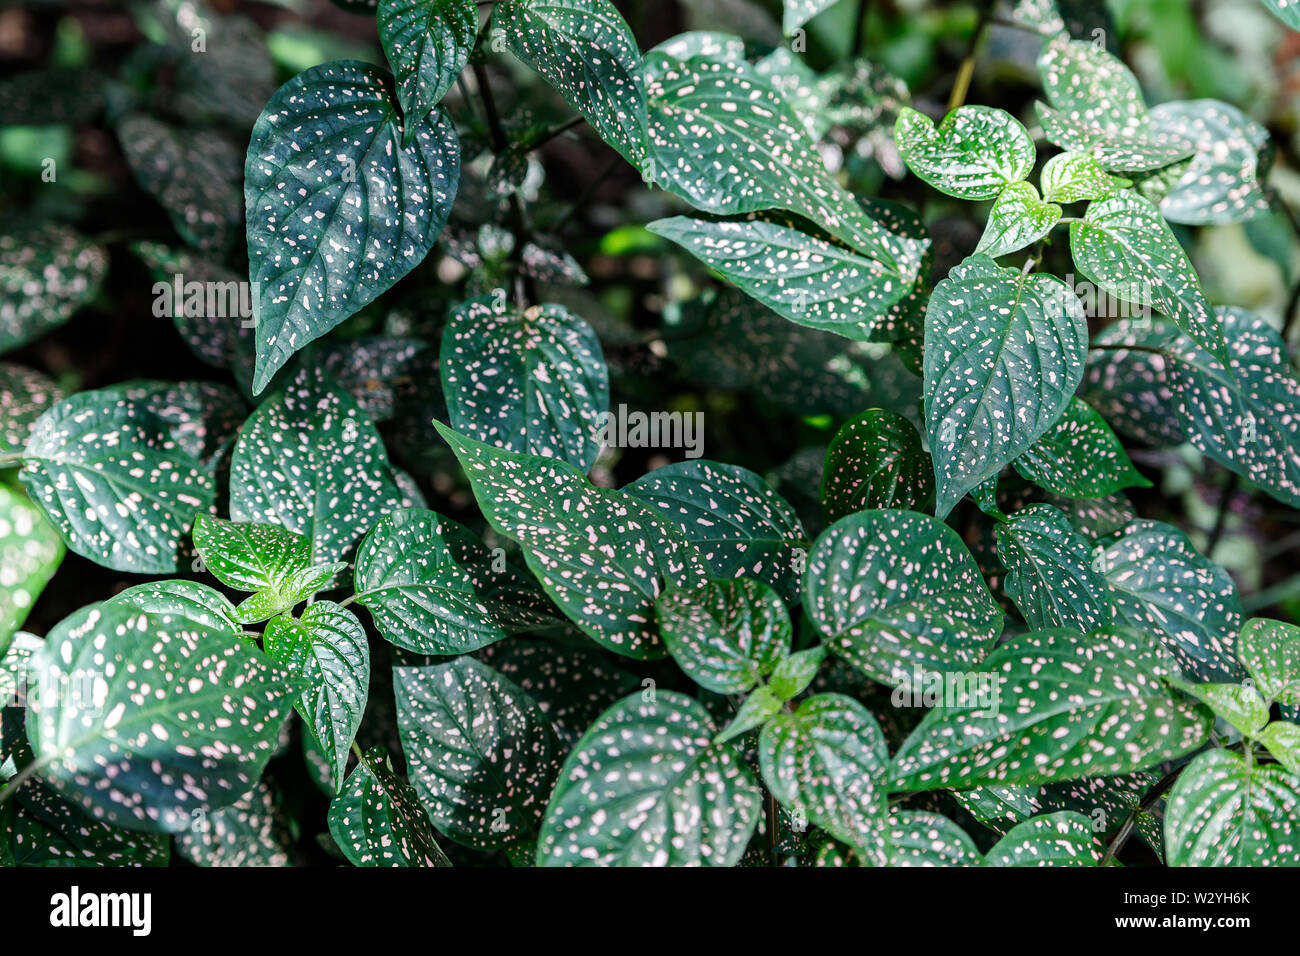 Hypoestes phyllostachya with pink spotted leaves, polka dot plant Stock Photo